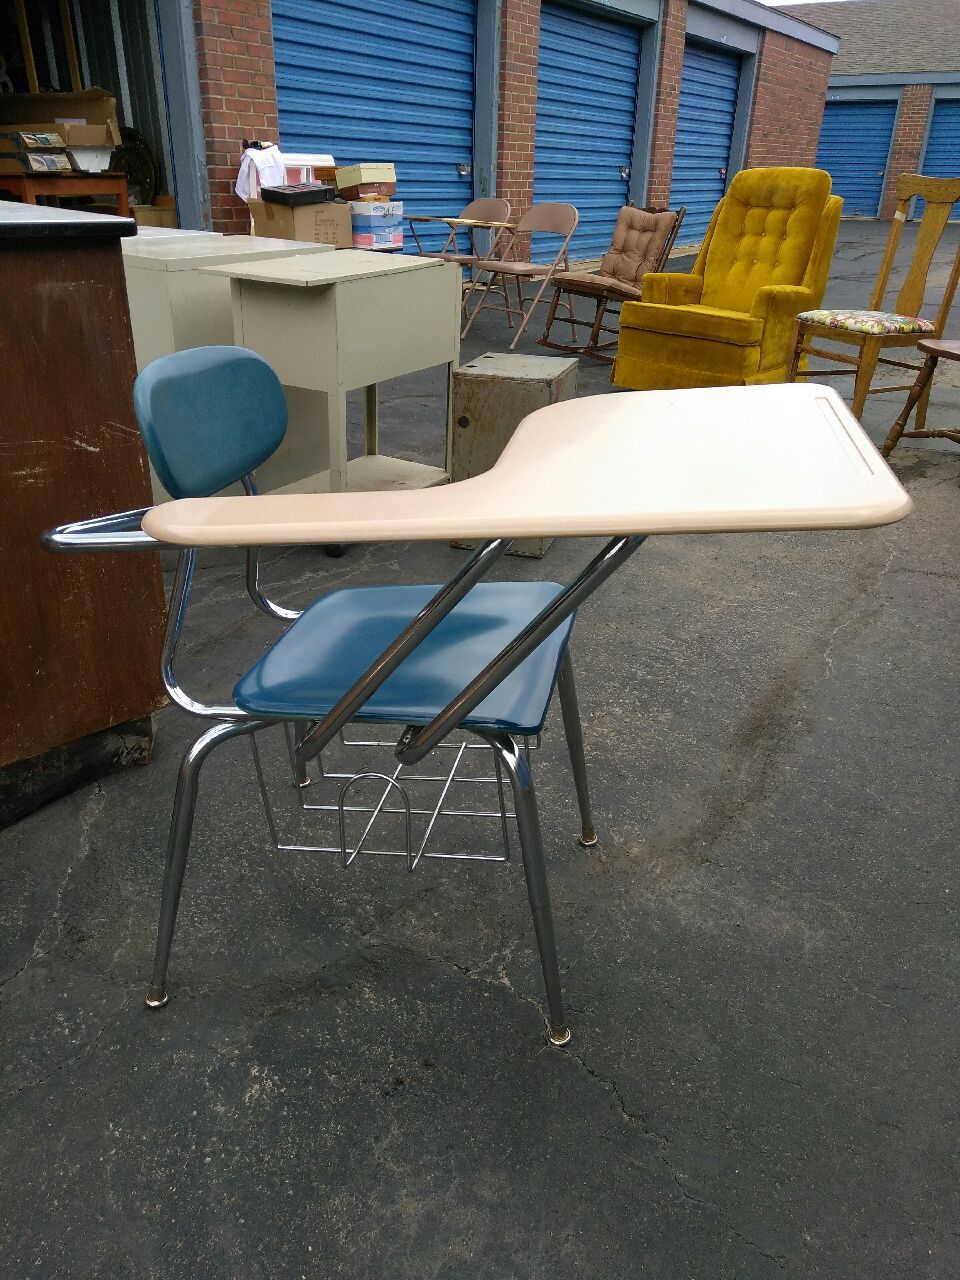 !!!/School desk chairs $10each OBO delivery available !!!